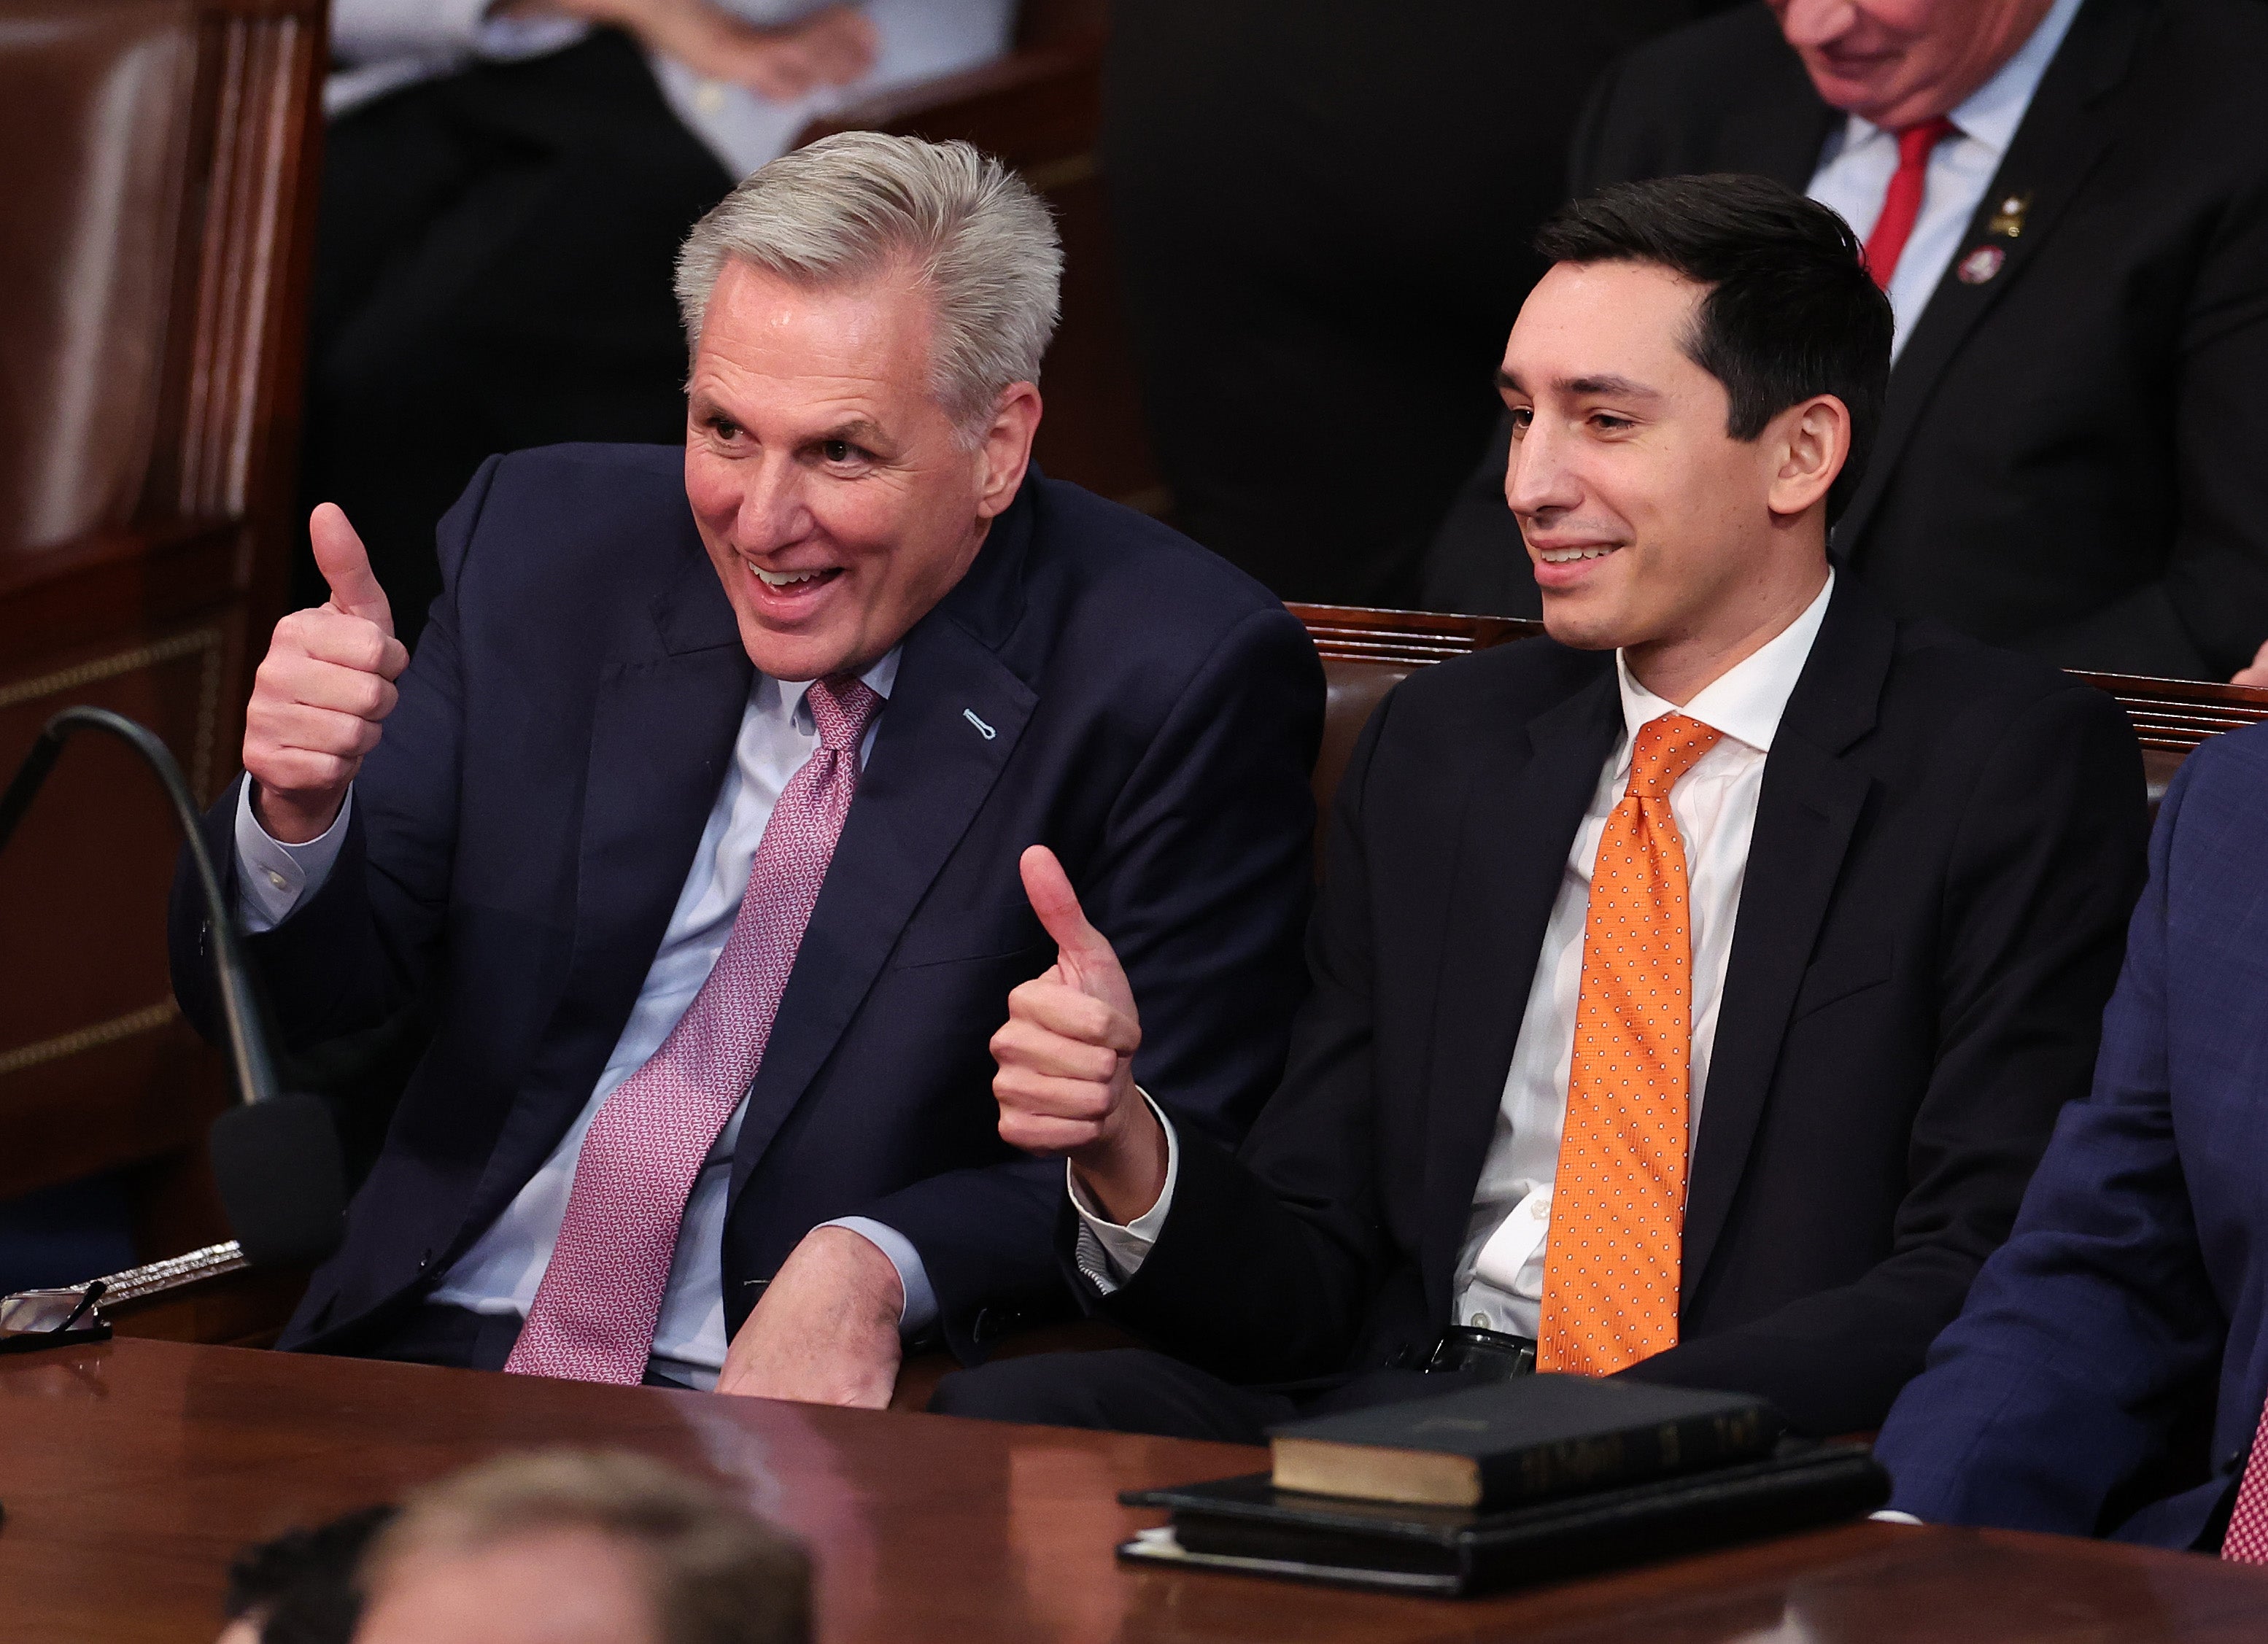 House Republican leader Kevin McCarthy and John Leganski, his deputy chief of staff, celebrate after McCarthy was elected speaker of the House on 7 January 2023 in Washington, DC